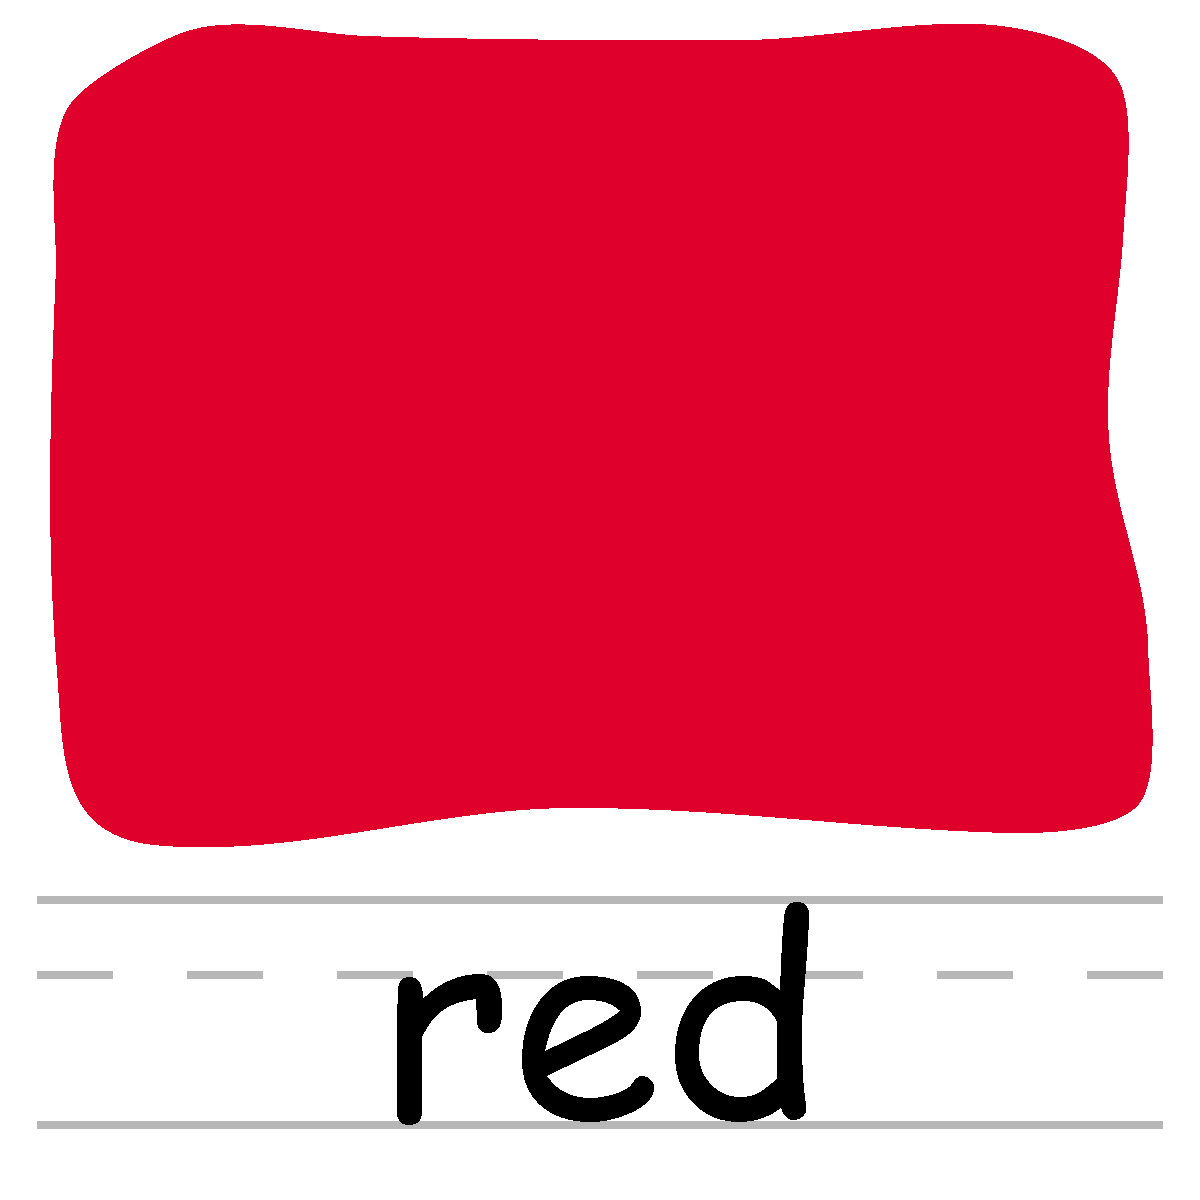 Red Crayon Clip Art | Clipart Panda - Free Clipart Images